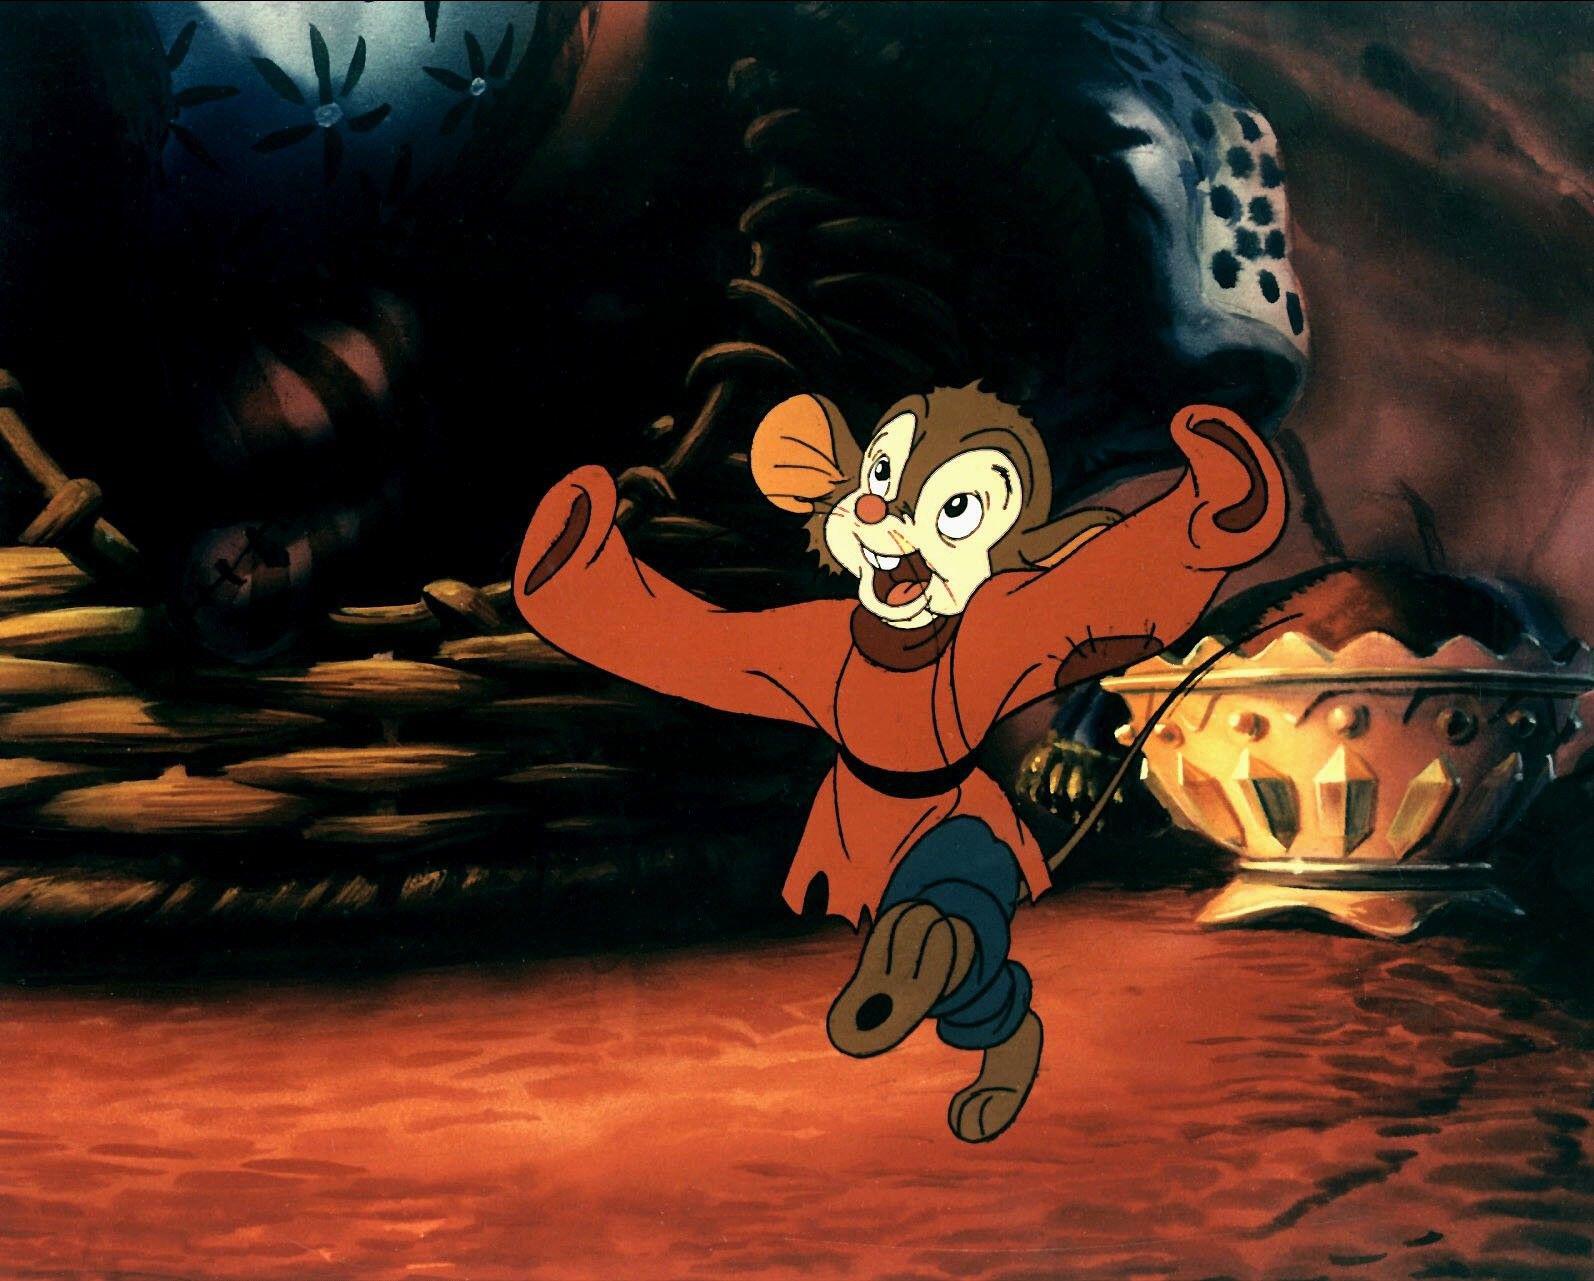 A scene from the 1986 animated film 'An American Tail'